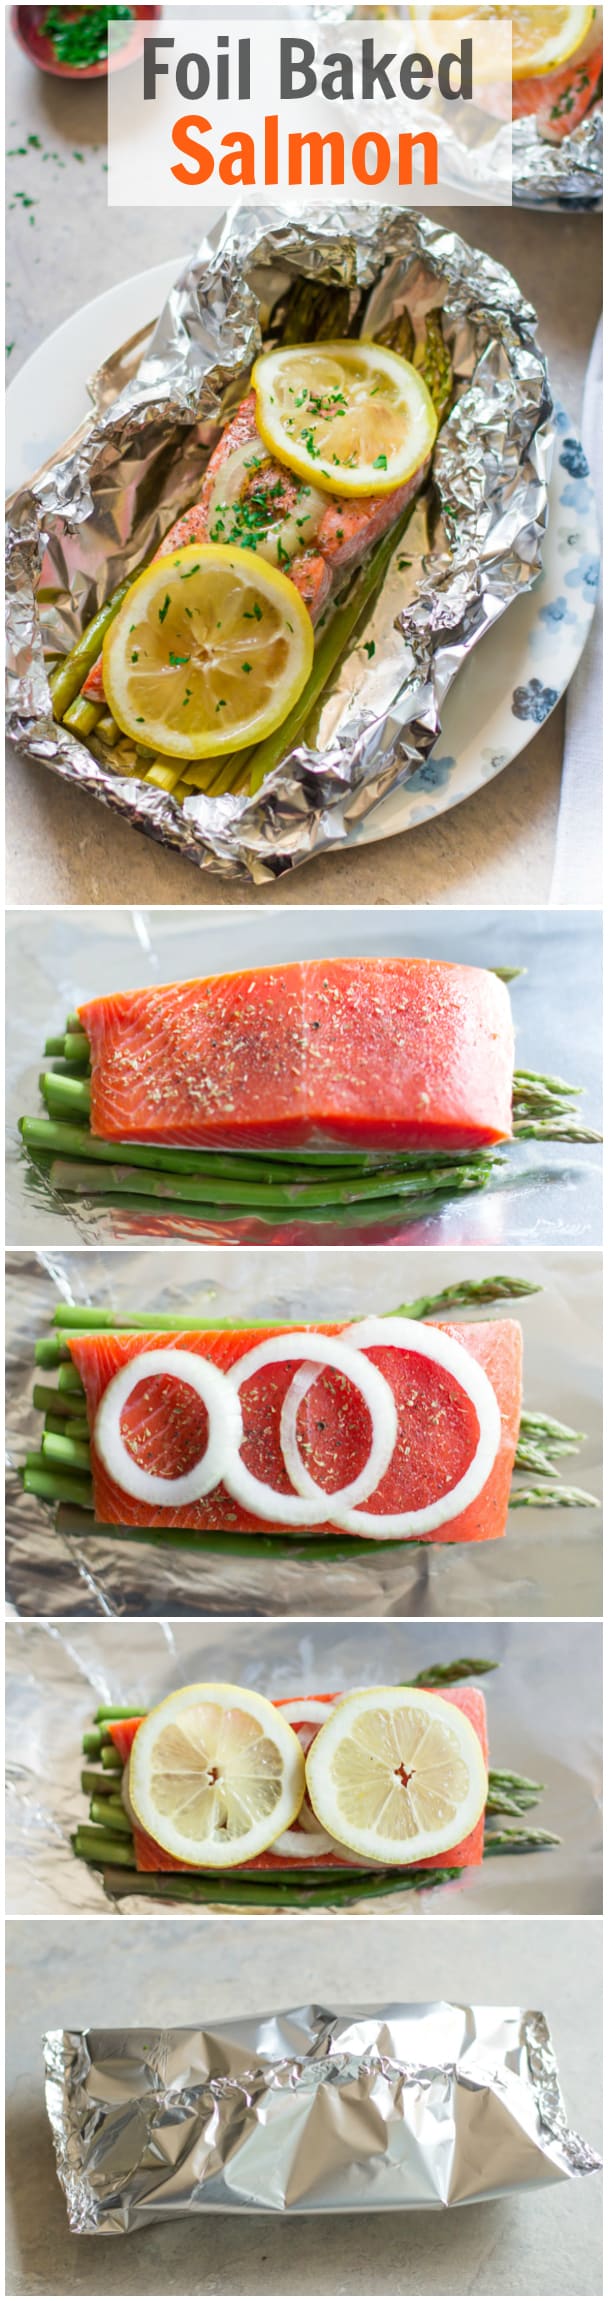 Foil Baked Salmon - You infuse your salmon with lemon, onion, dried oregano and asparagus for a richer flavor. Gluten-free, paleo, and low-carb!